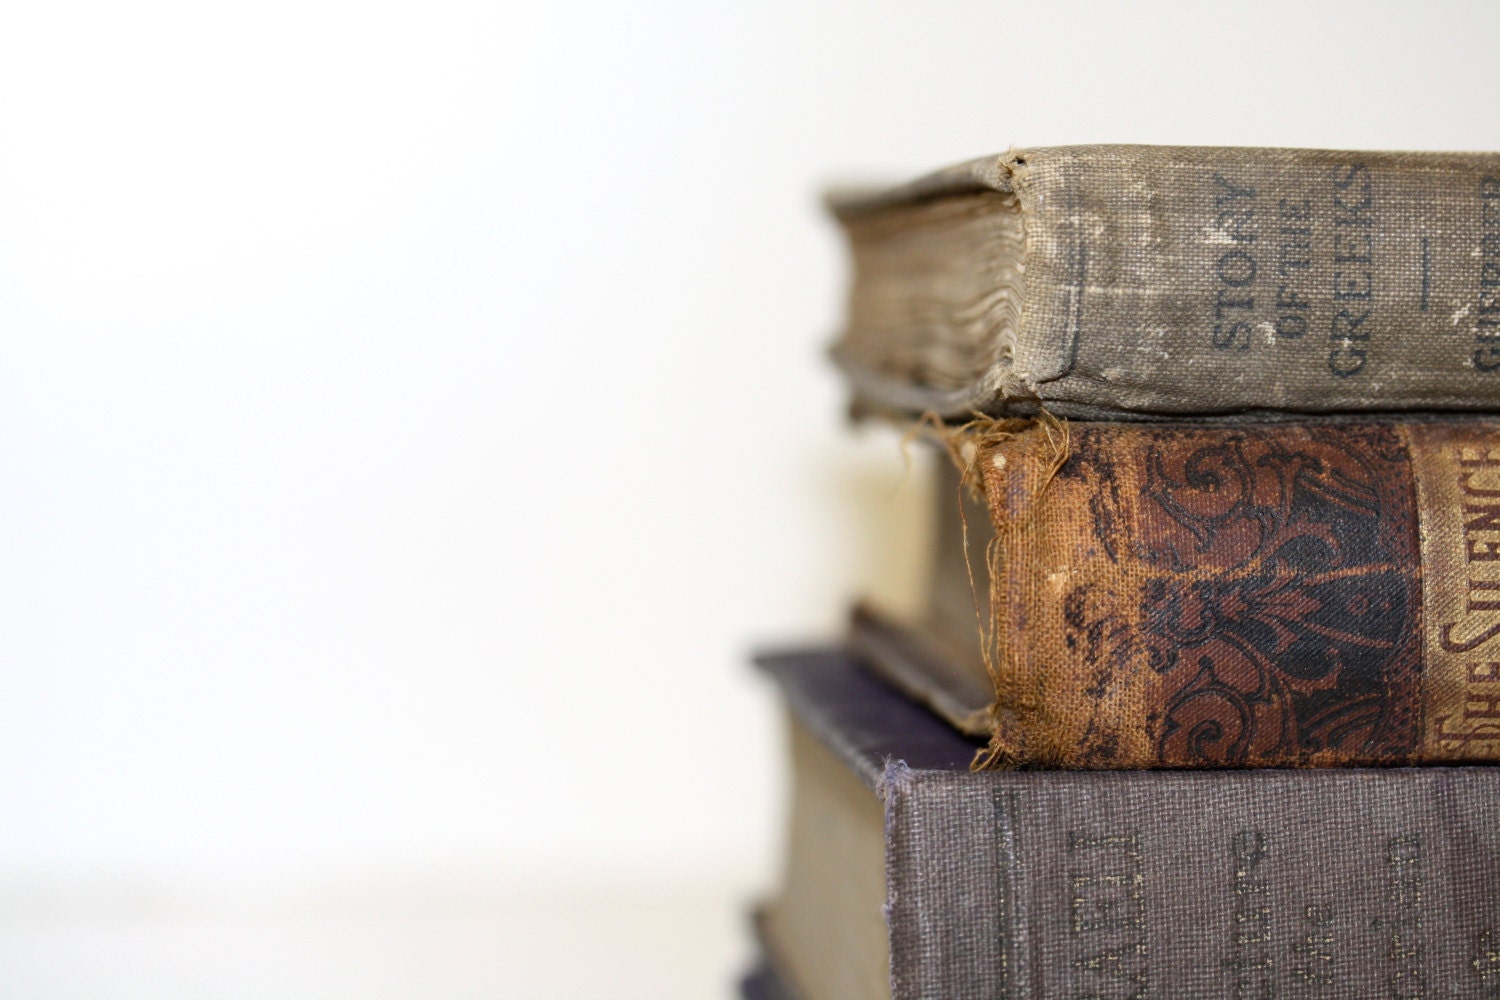 Shabby Chic Book Collection Faded Lilac Brown Tones Wedding Photography Prop  TREASURY ITEM - jaysworld